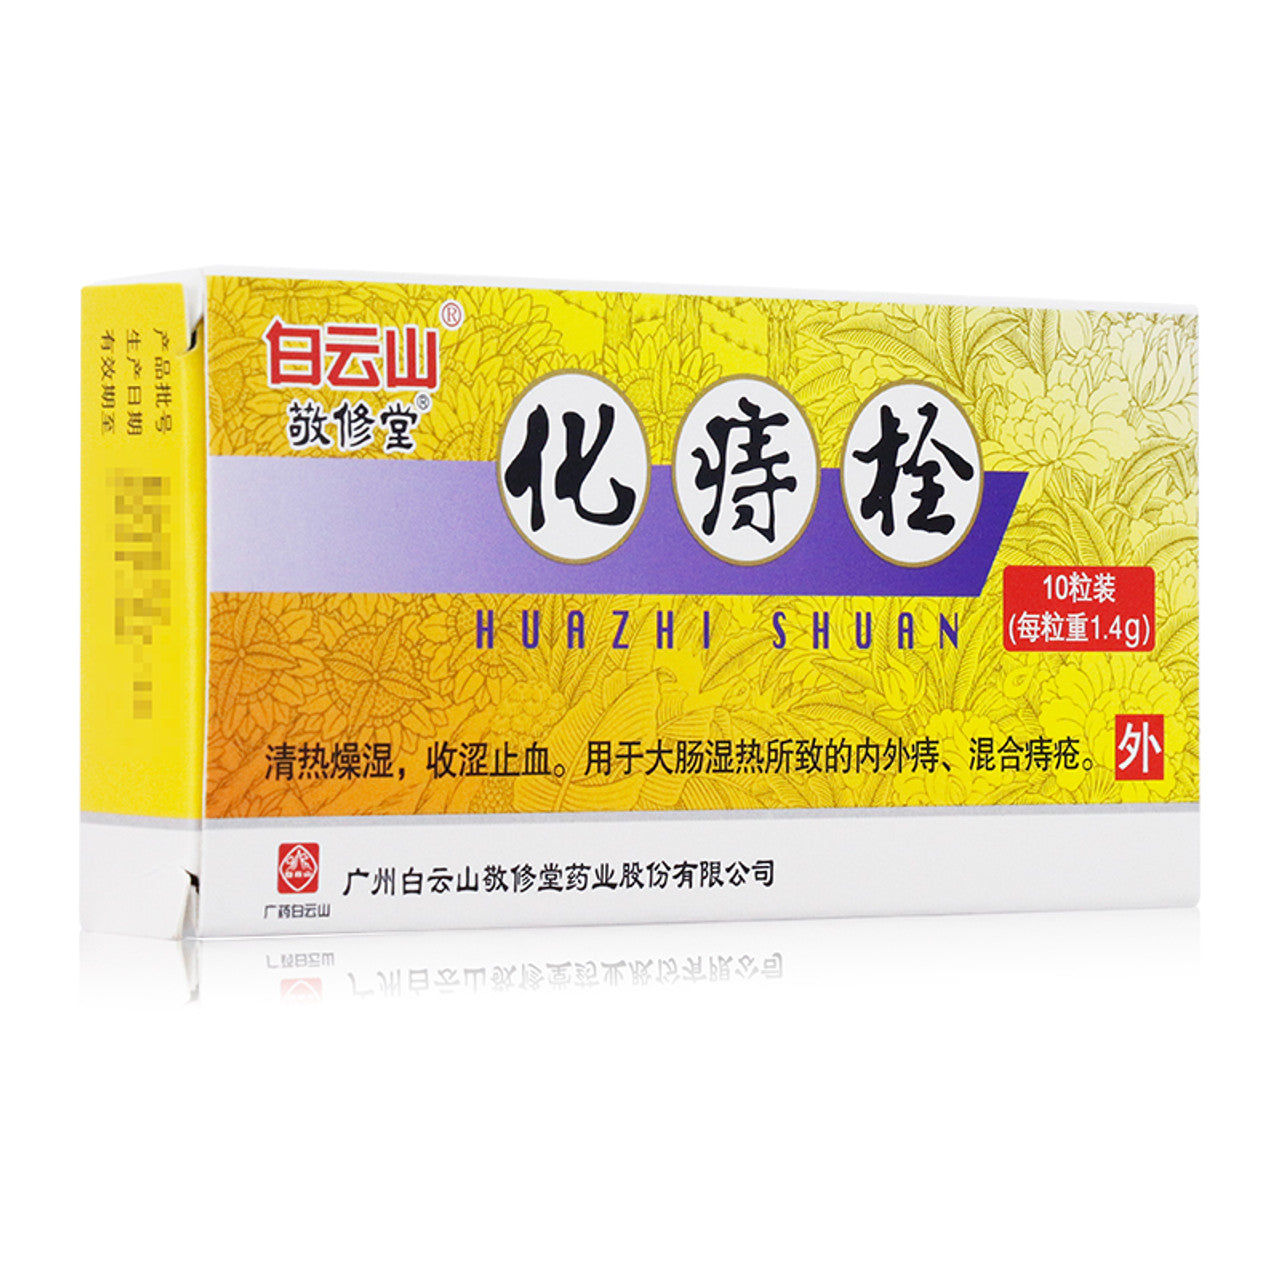 Herbal Medicine Suppositories. Brand Baiyunshan. Huazhi Shuan or Hua Zhi Shuan or Huazhi Suppositories for internal and external hemorrhoids and mixed hemorrhoids caused by damp heat in the large intestine.